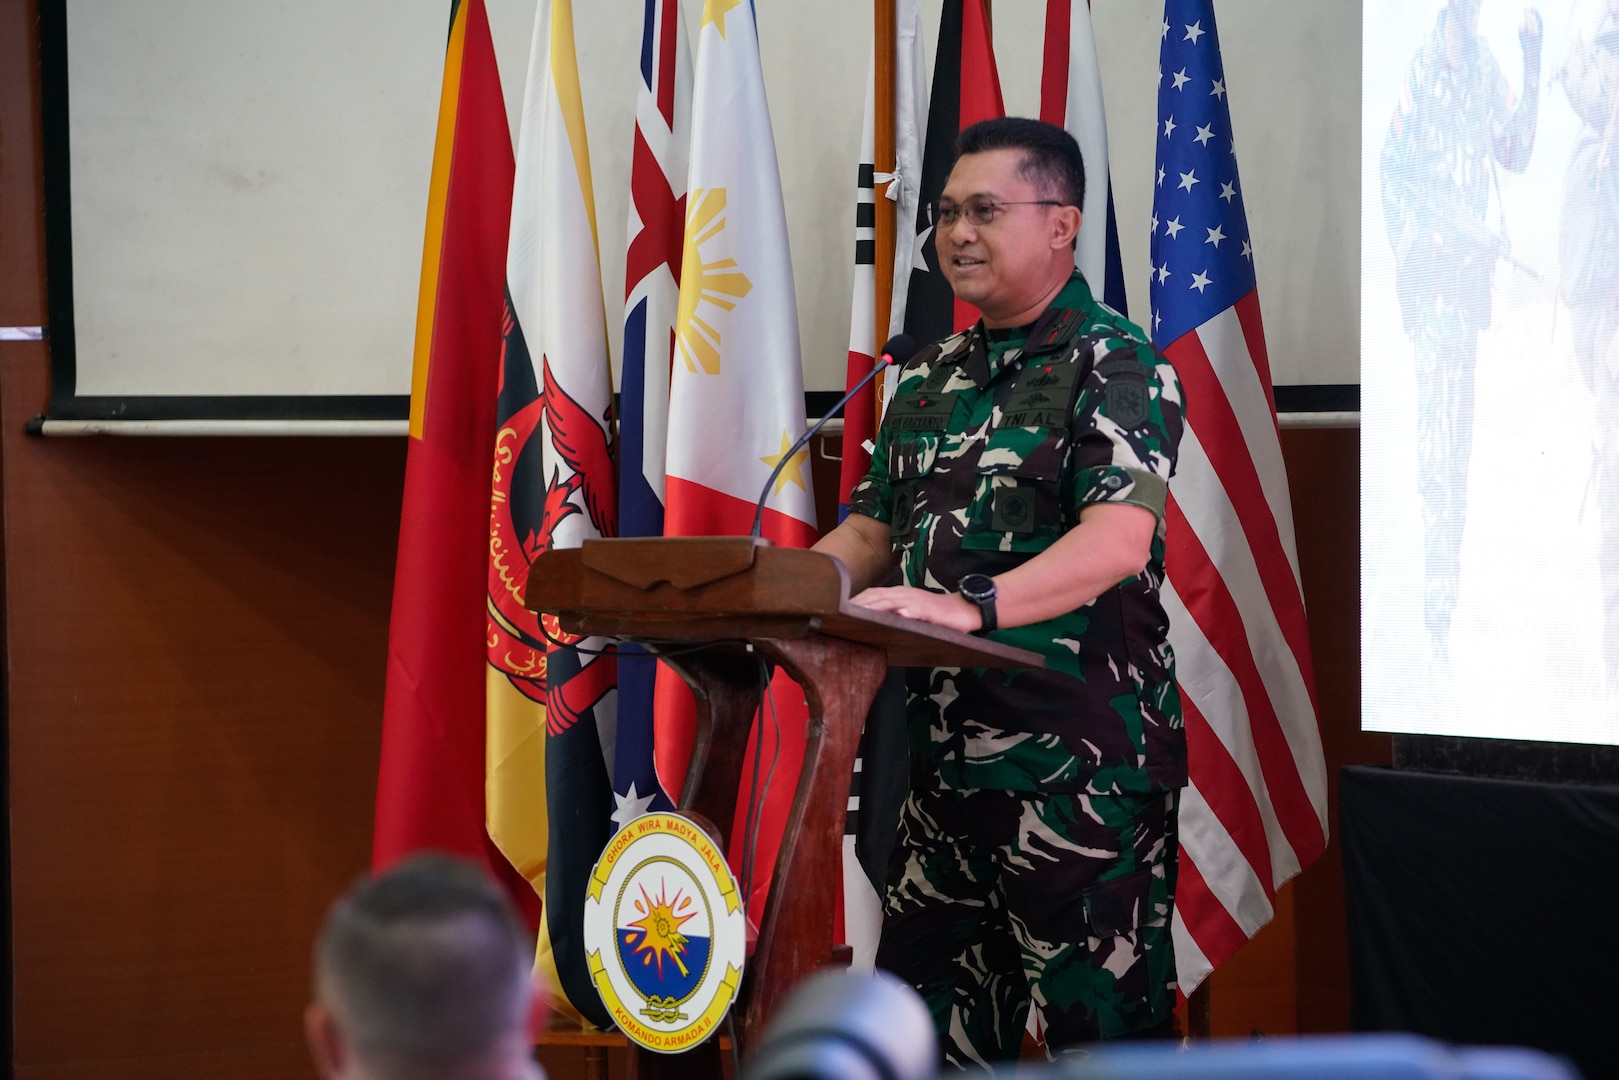 ADM Edi, Commander Guspurla Koormada 2, Tentara Nasional Indonesia (TNI), delivers his opening remarks during the opening ceremony of staff exercise portion of Super Garuda Shield 2023 (SGS23) August 31, 2023, Surabaya Indonesia. #SuperGarudaShield 2023 is an annual exercise that has significantly grown in scope and size since 2009. #SGS2023 is the second consecutive time this exercise has grown into a combined and #joint event, highlighting the 6 participating and 12 observing nations’ commitment to #partnership and a #freeandopenindopacific. (US Air National Guard Photo by Air Force Master Sgt. Andrew Lee Jackson)